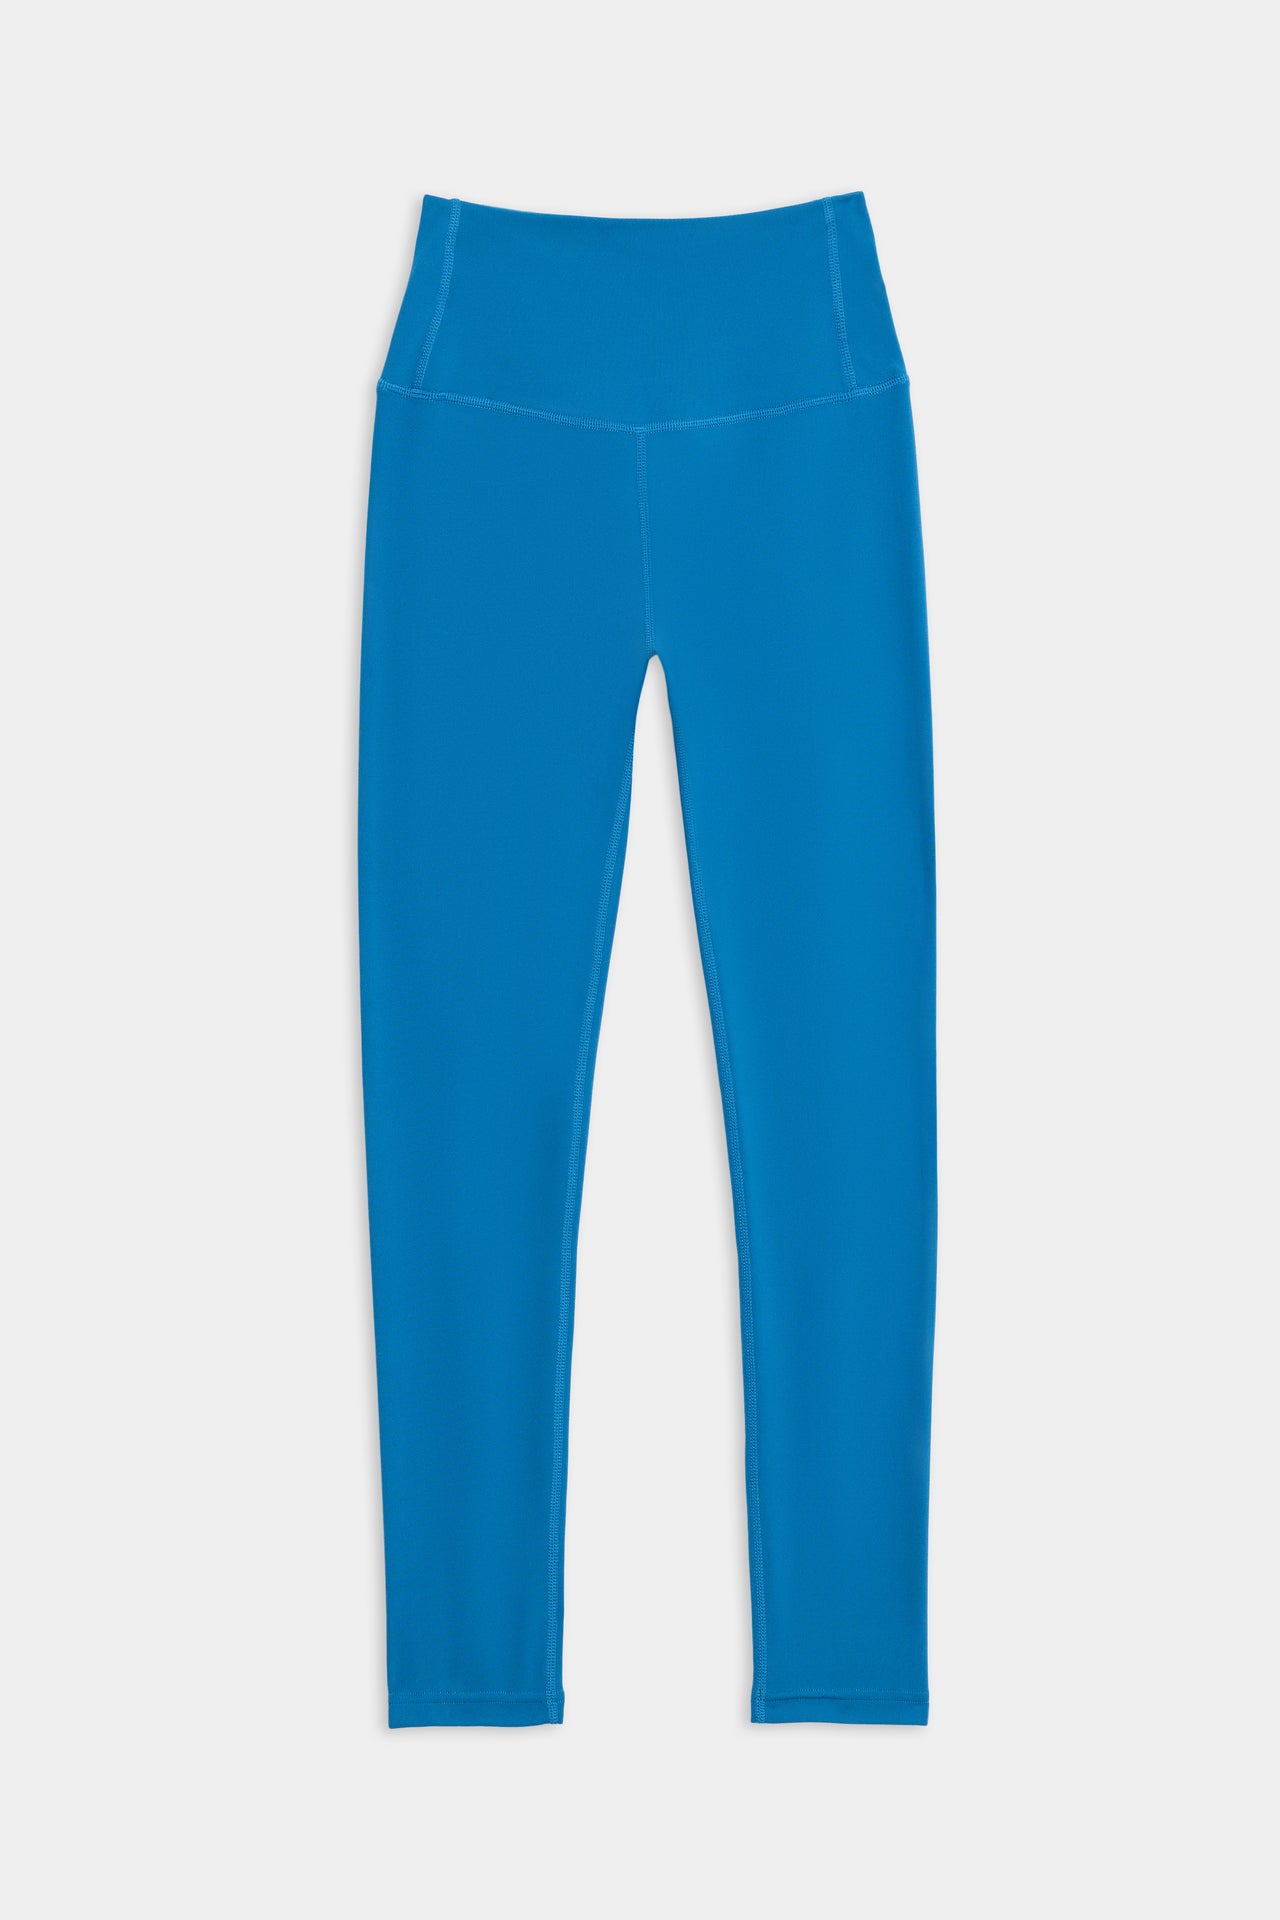 Airweight High Waist Legging - Stone Blue by SPLITS59, made of 81% nylon 19% spandex, isolated on a white background.